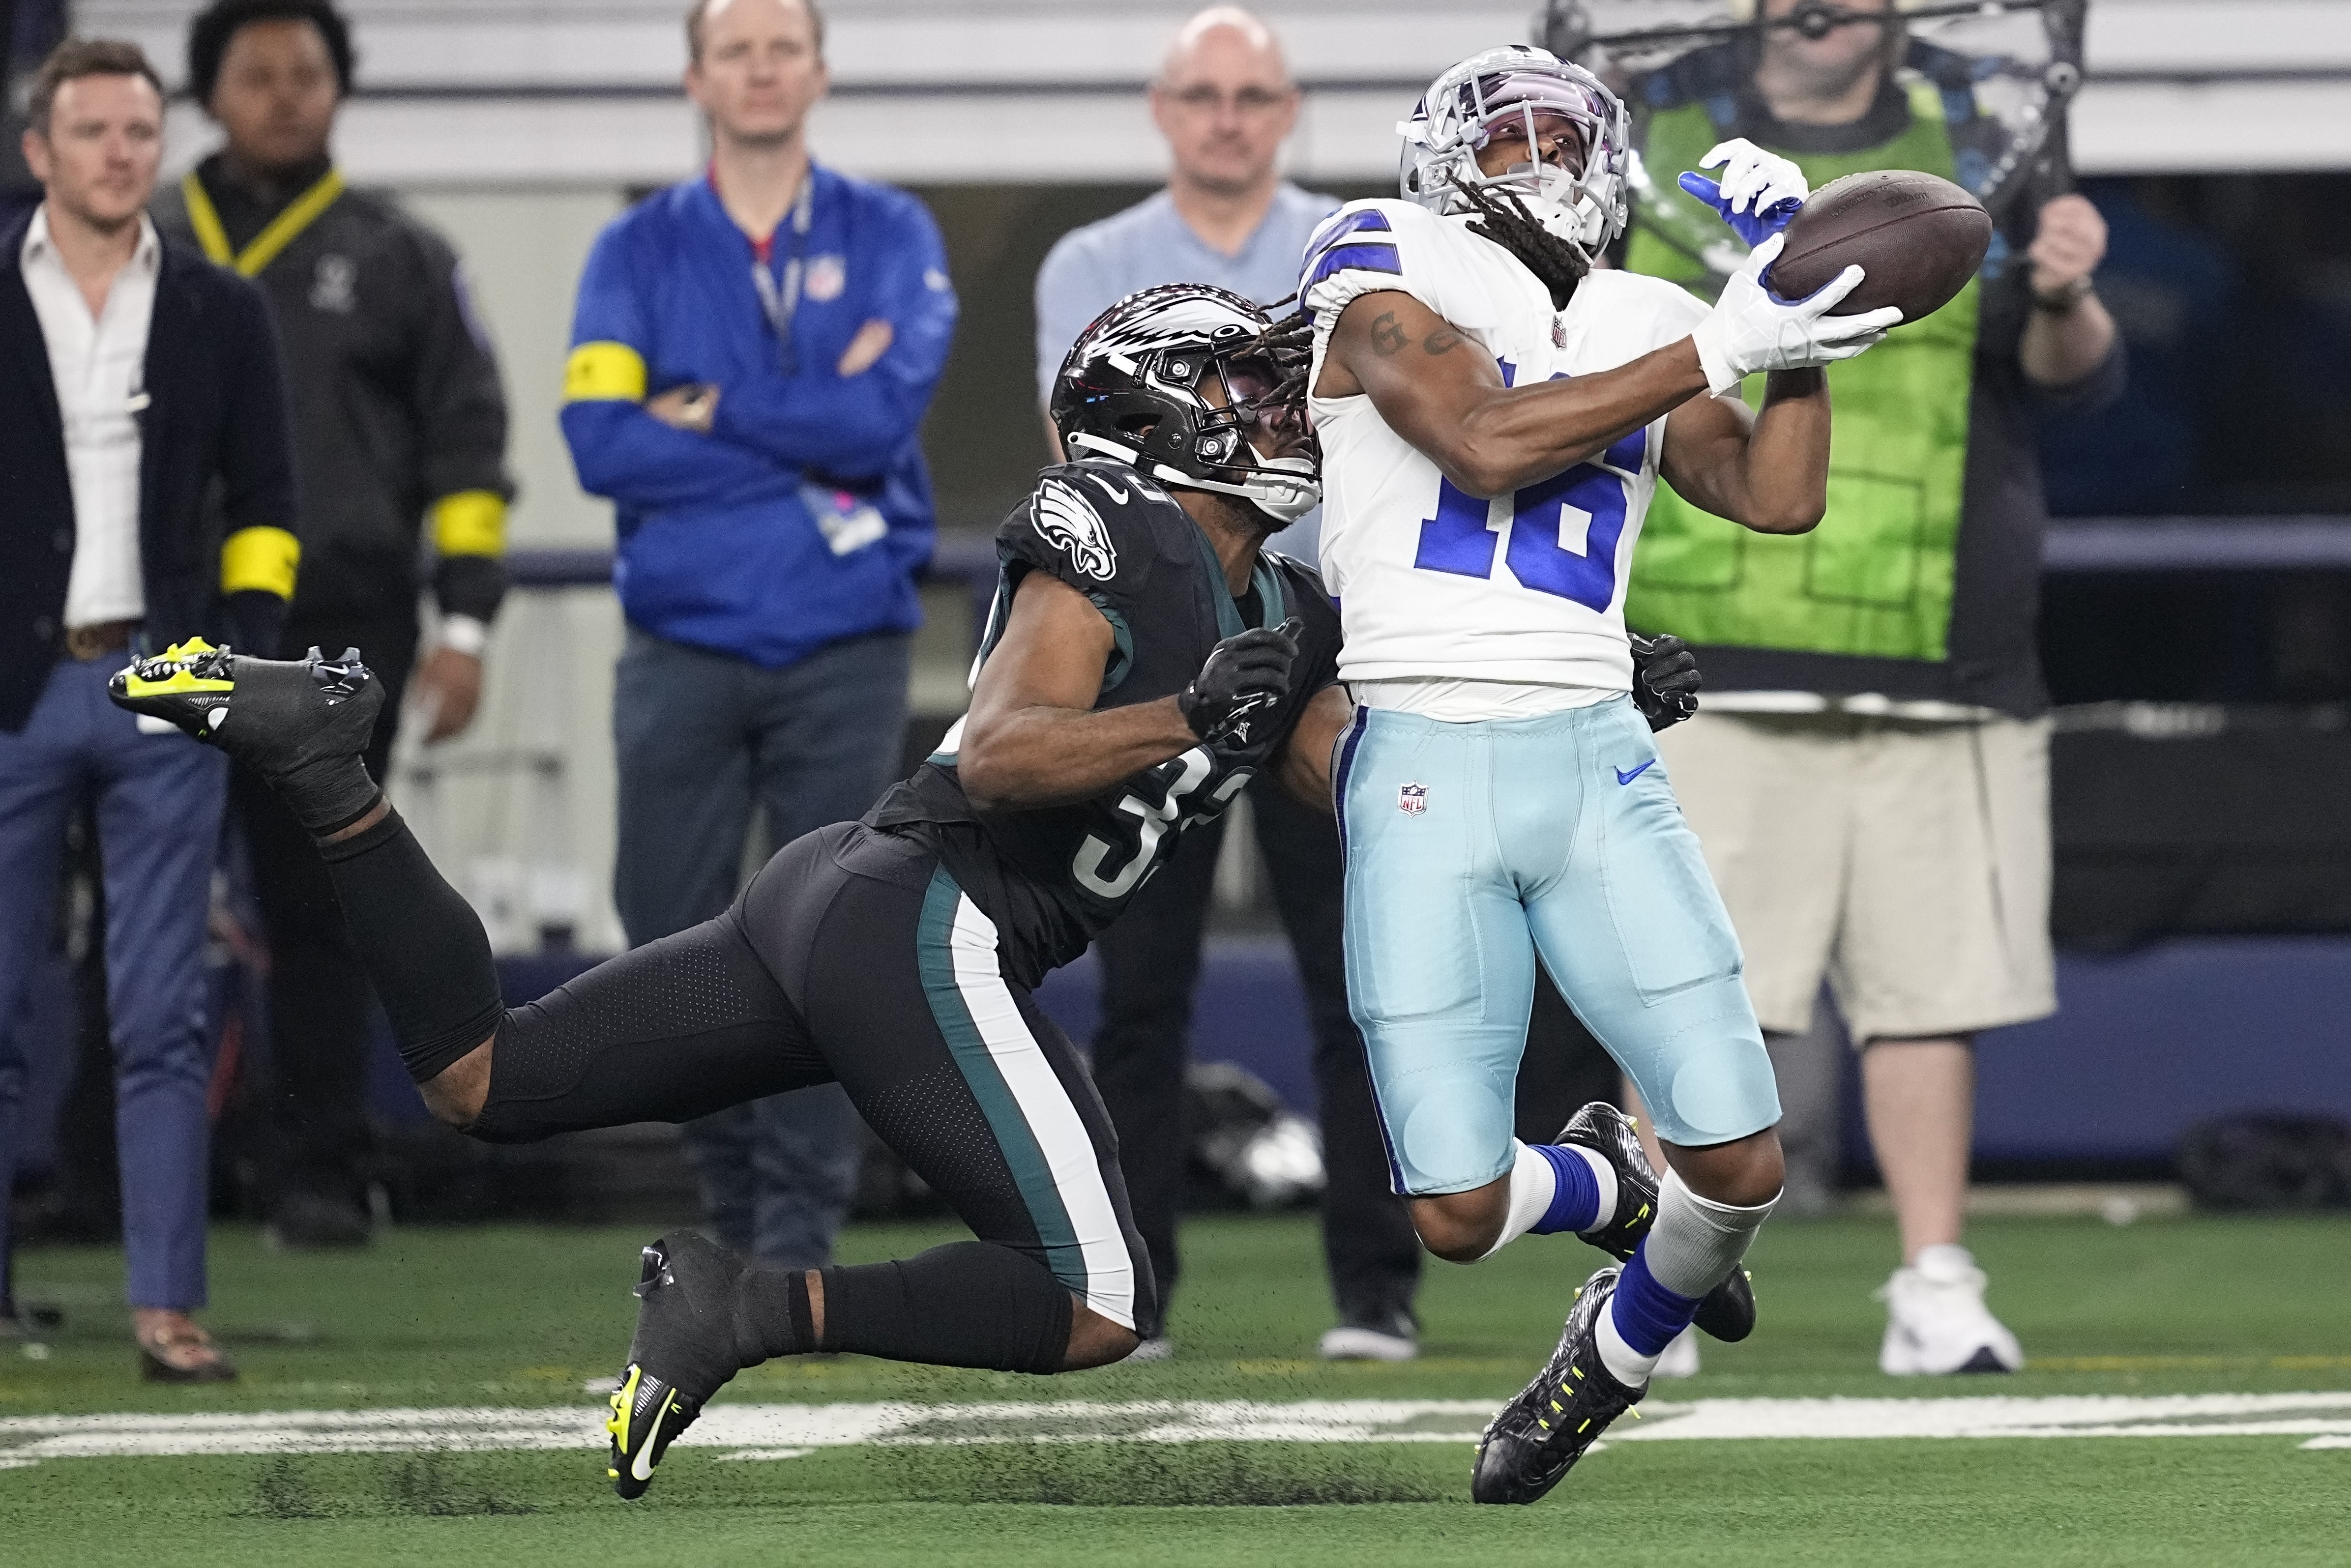 Dallas Cowboys Receiver CeeDee Lamb Featured On NFC East All